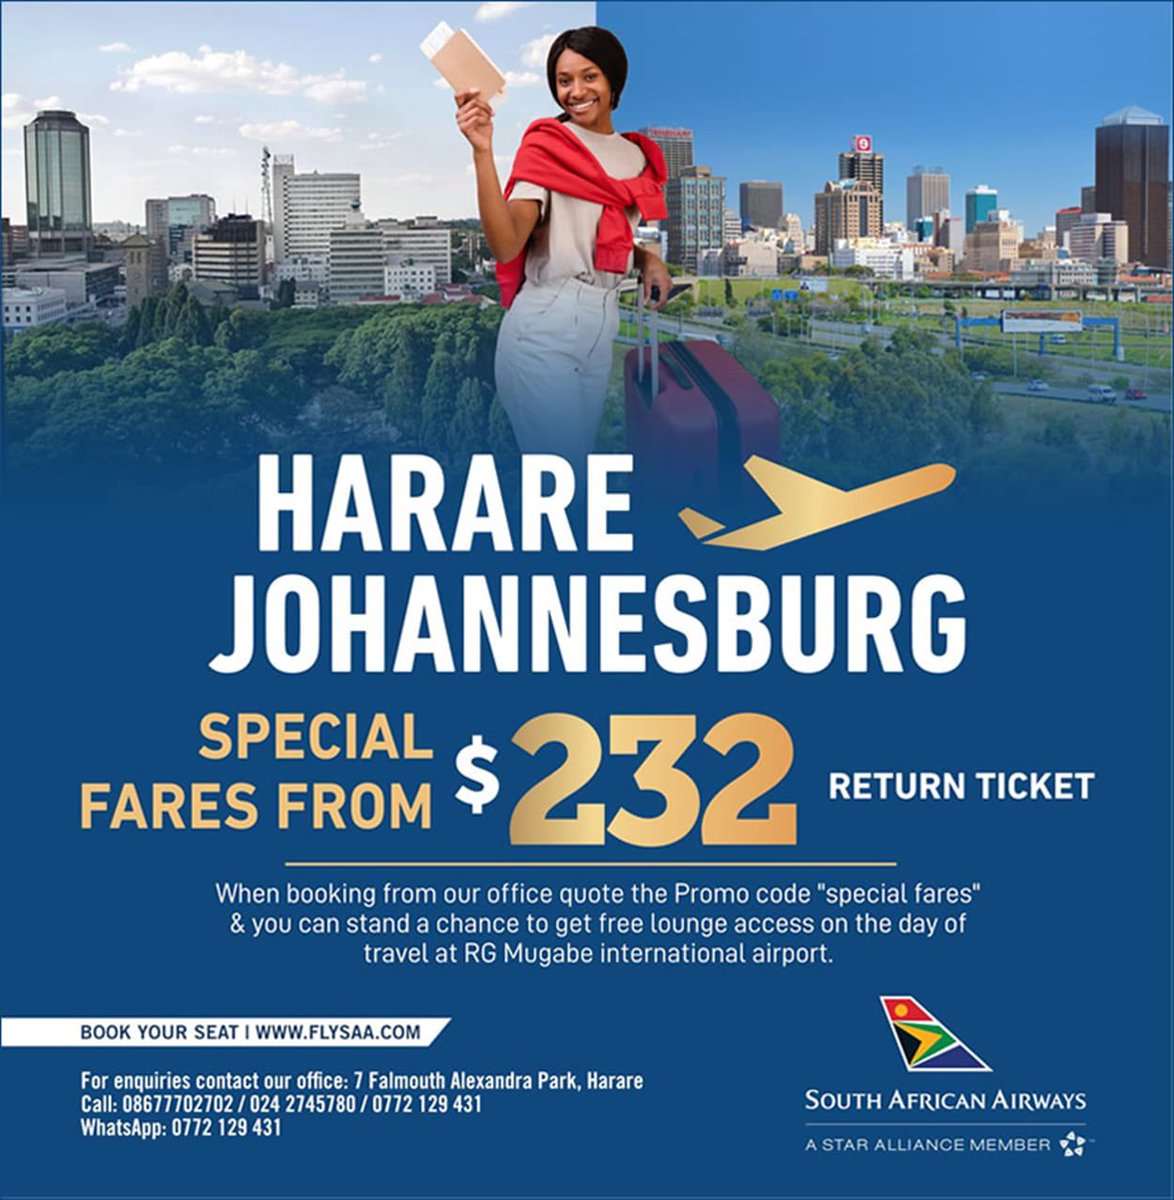 The effect of competition is lower prices, when @FlySafair started servicing the Harare Johannesburg route, prices were as high as US$550 for a return ticket. It came with lower prices, and this is forcing its competitors to lower their prices too. Now South African Airways…